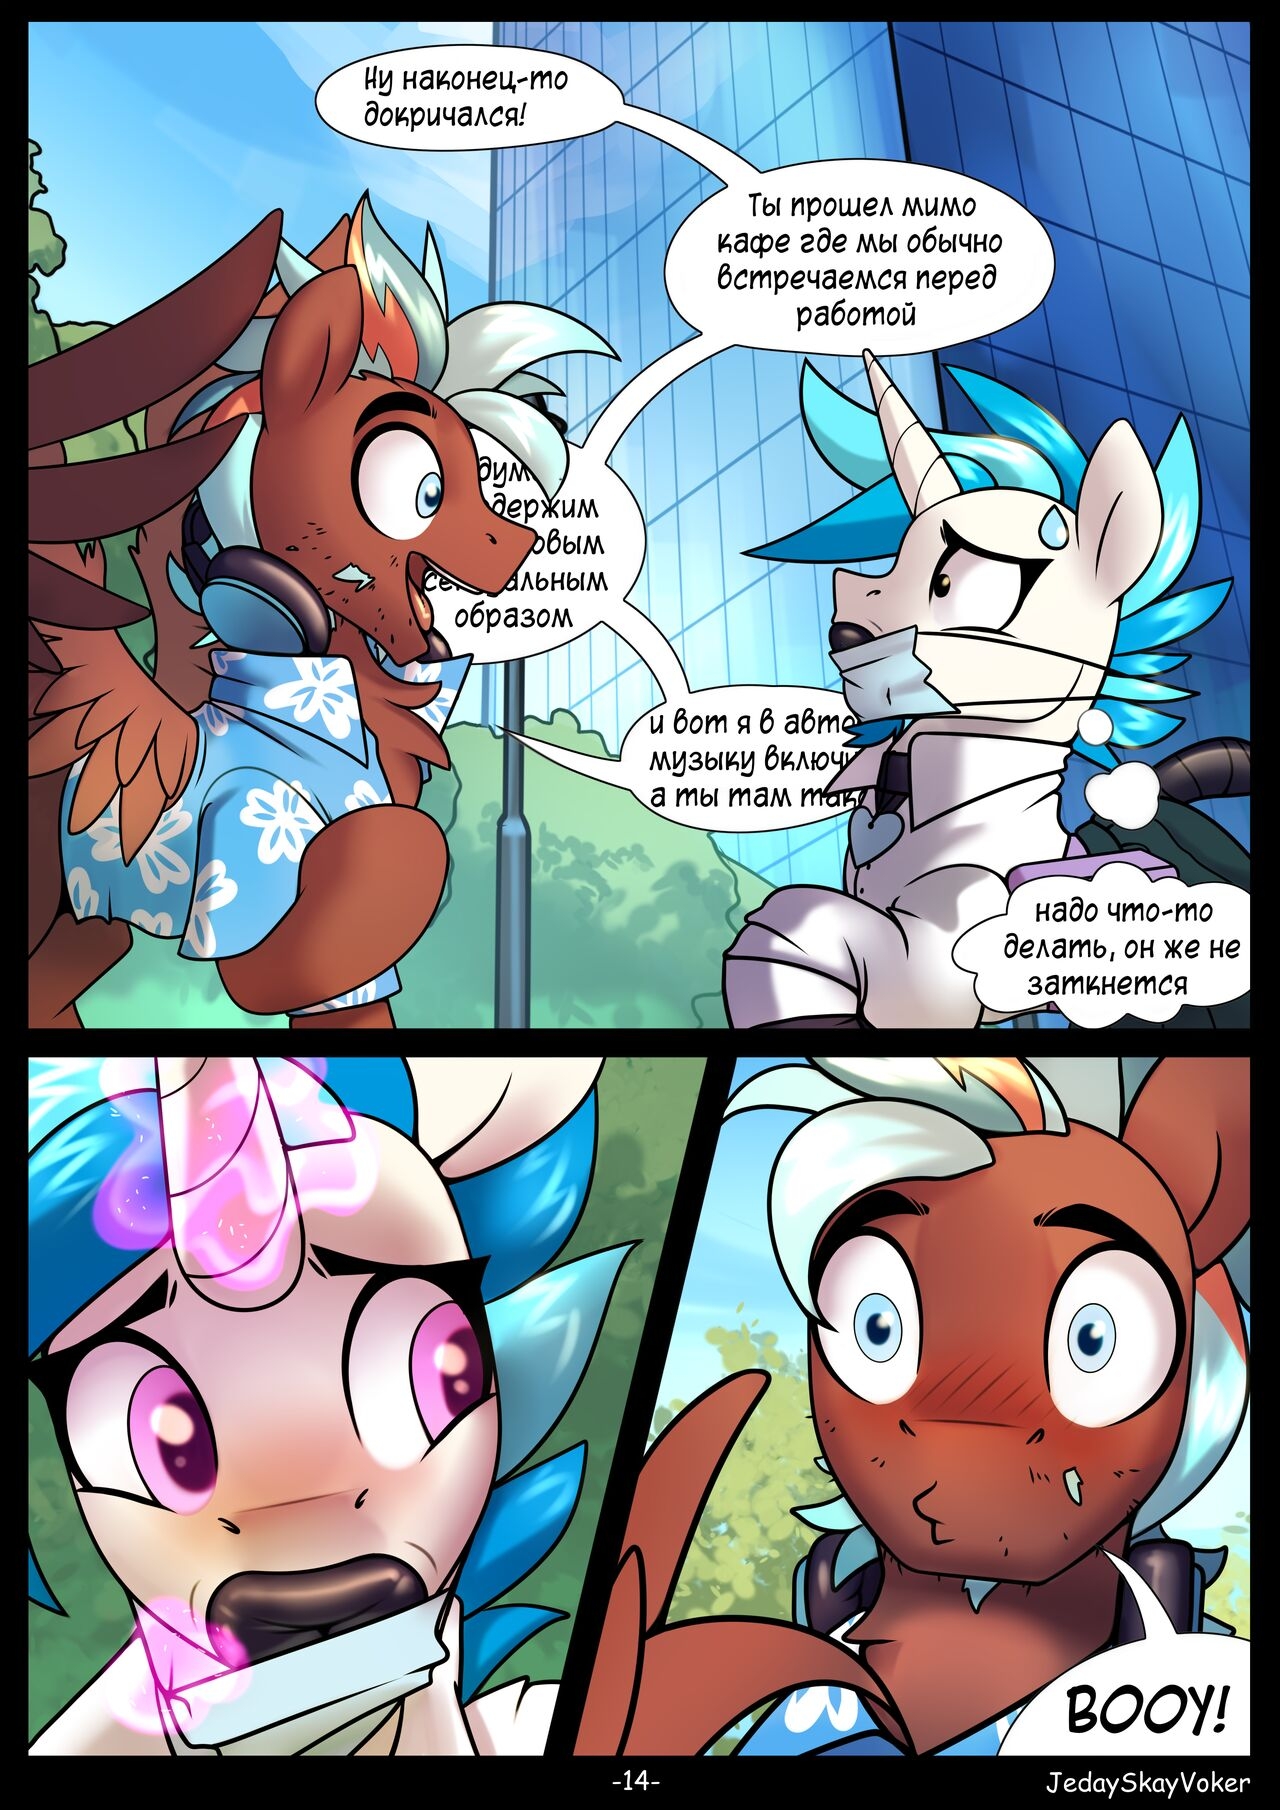 [JedaySkayVoker] Play the Record, ch. 1-3 (My Little Pony: Friendship is Magic) [+Sketches][Ongoing][Russian] 14